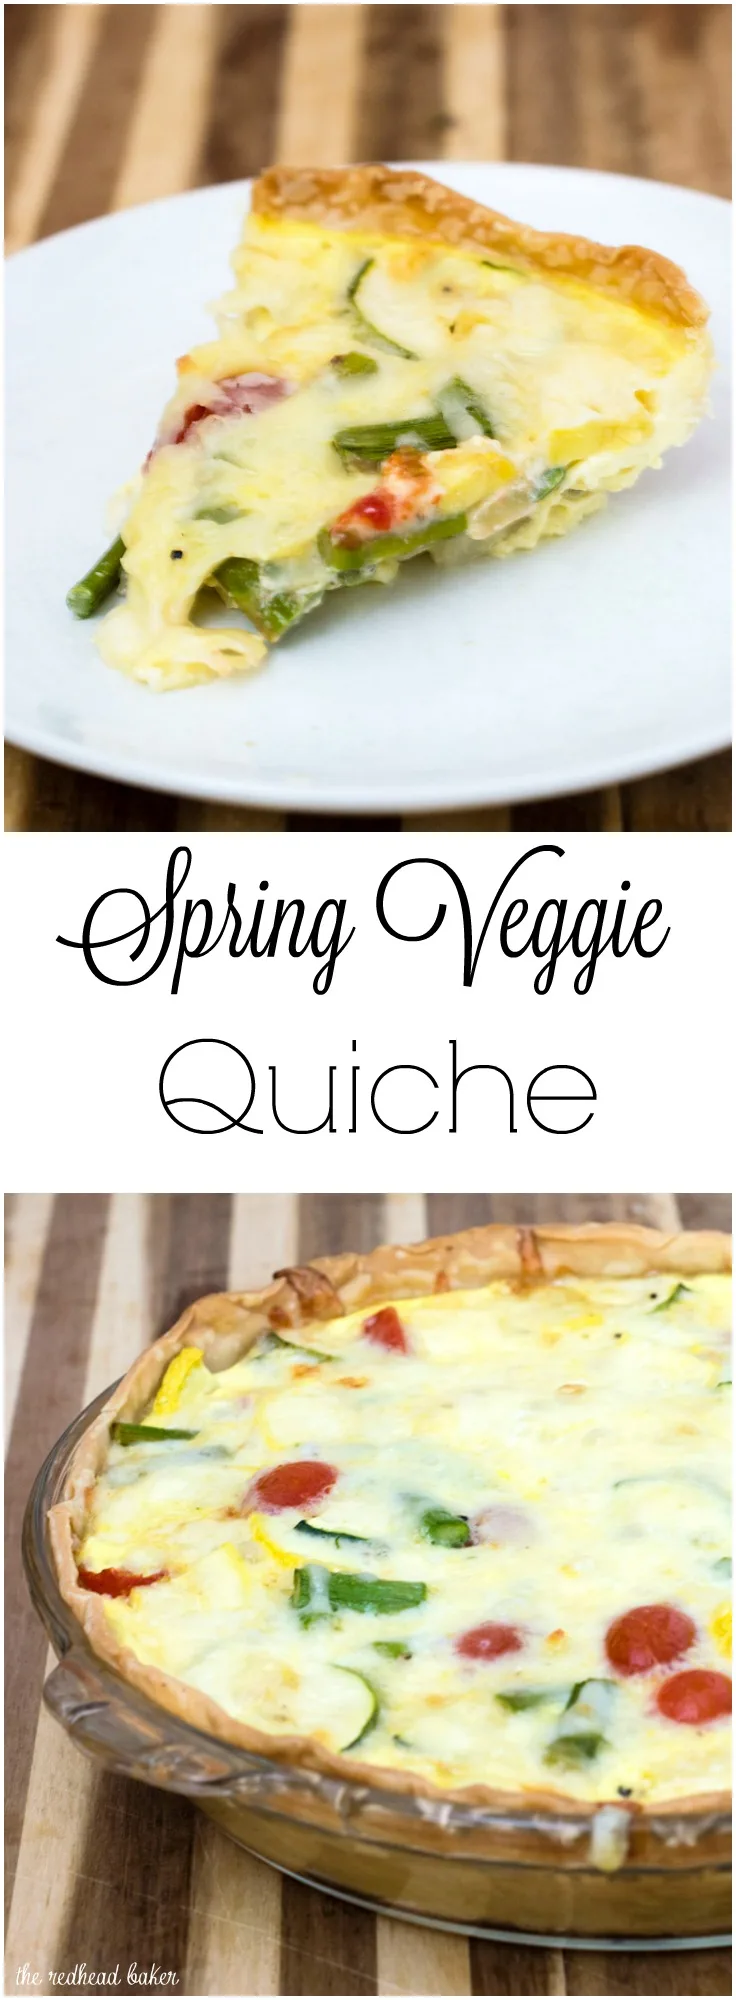 This veggie quiche is loaded with the freshest spring produce. It's a perfect make-ahead meal for breakfast, brunch or dinner! #WhatsBaking TheRedheadBaker.com